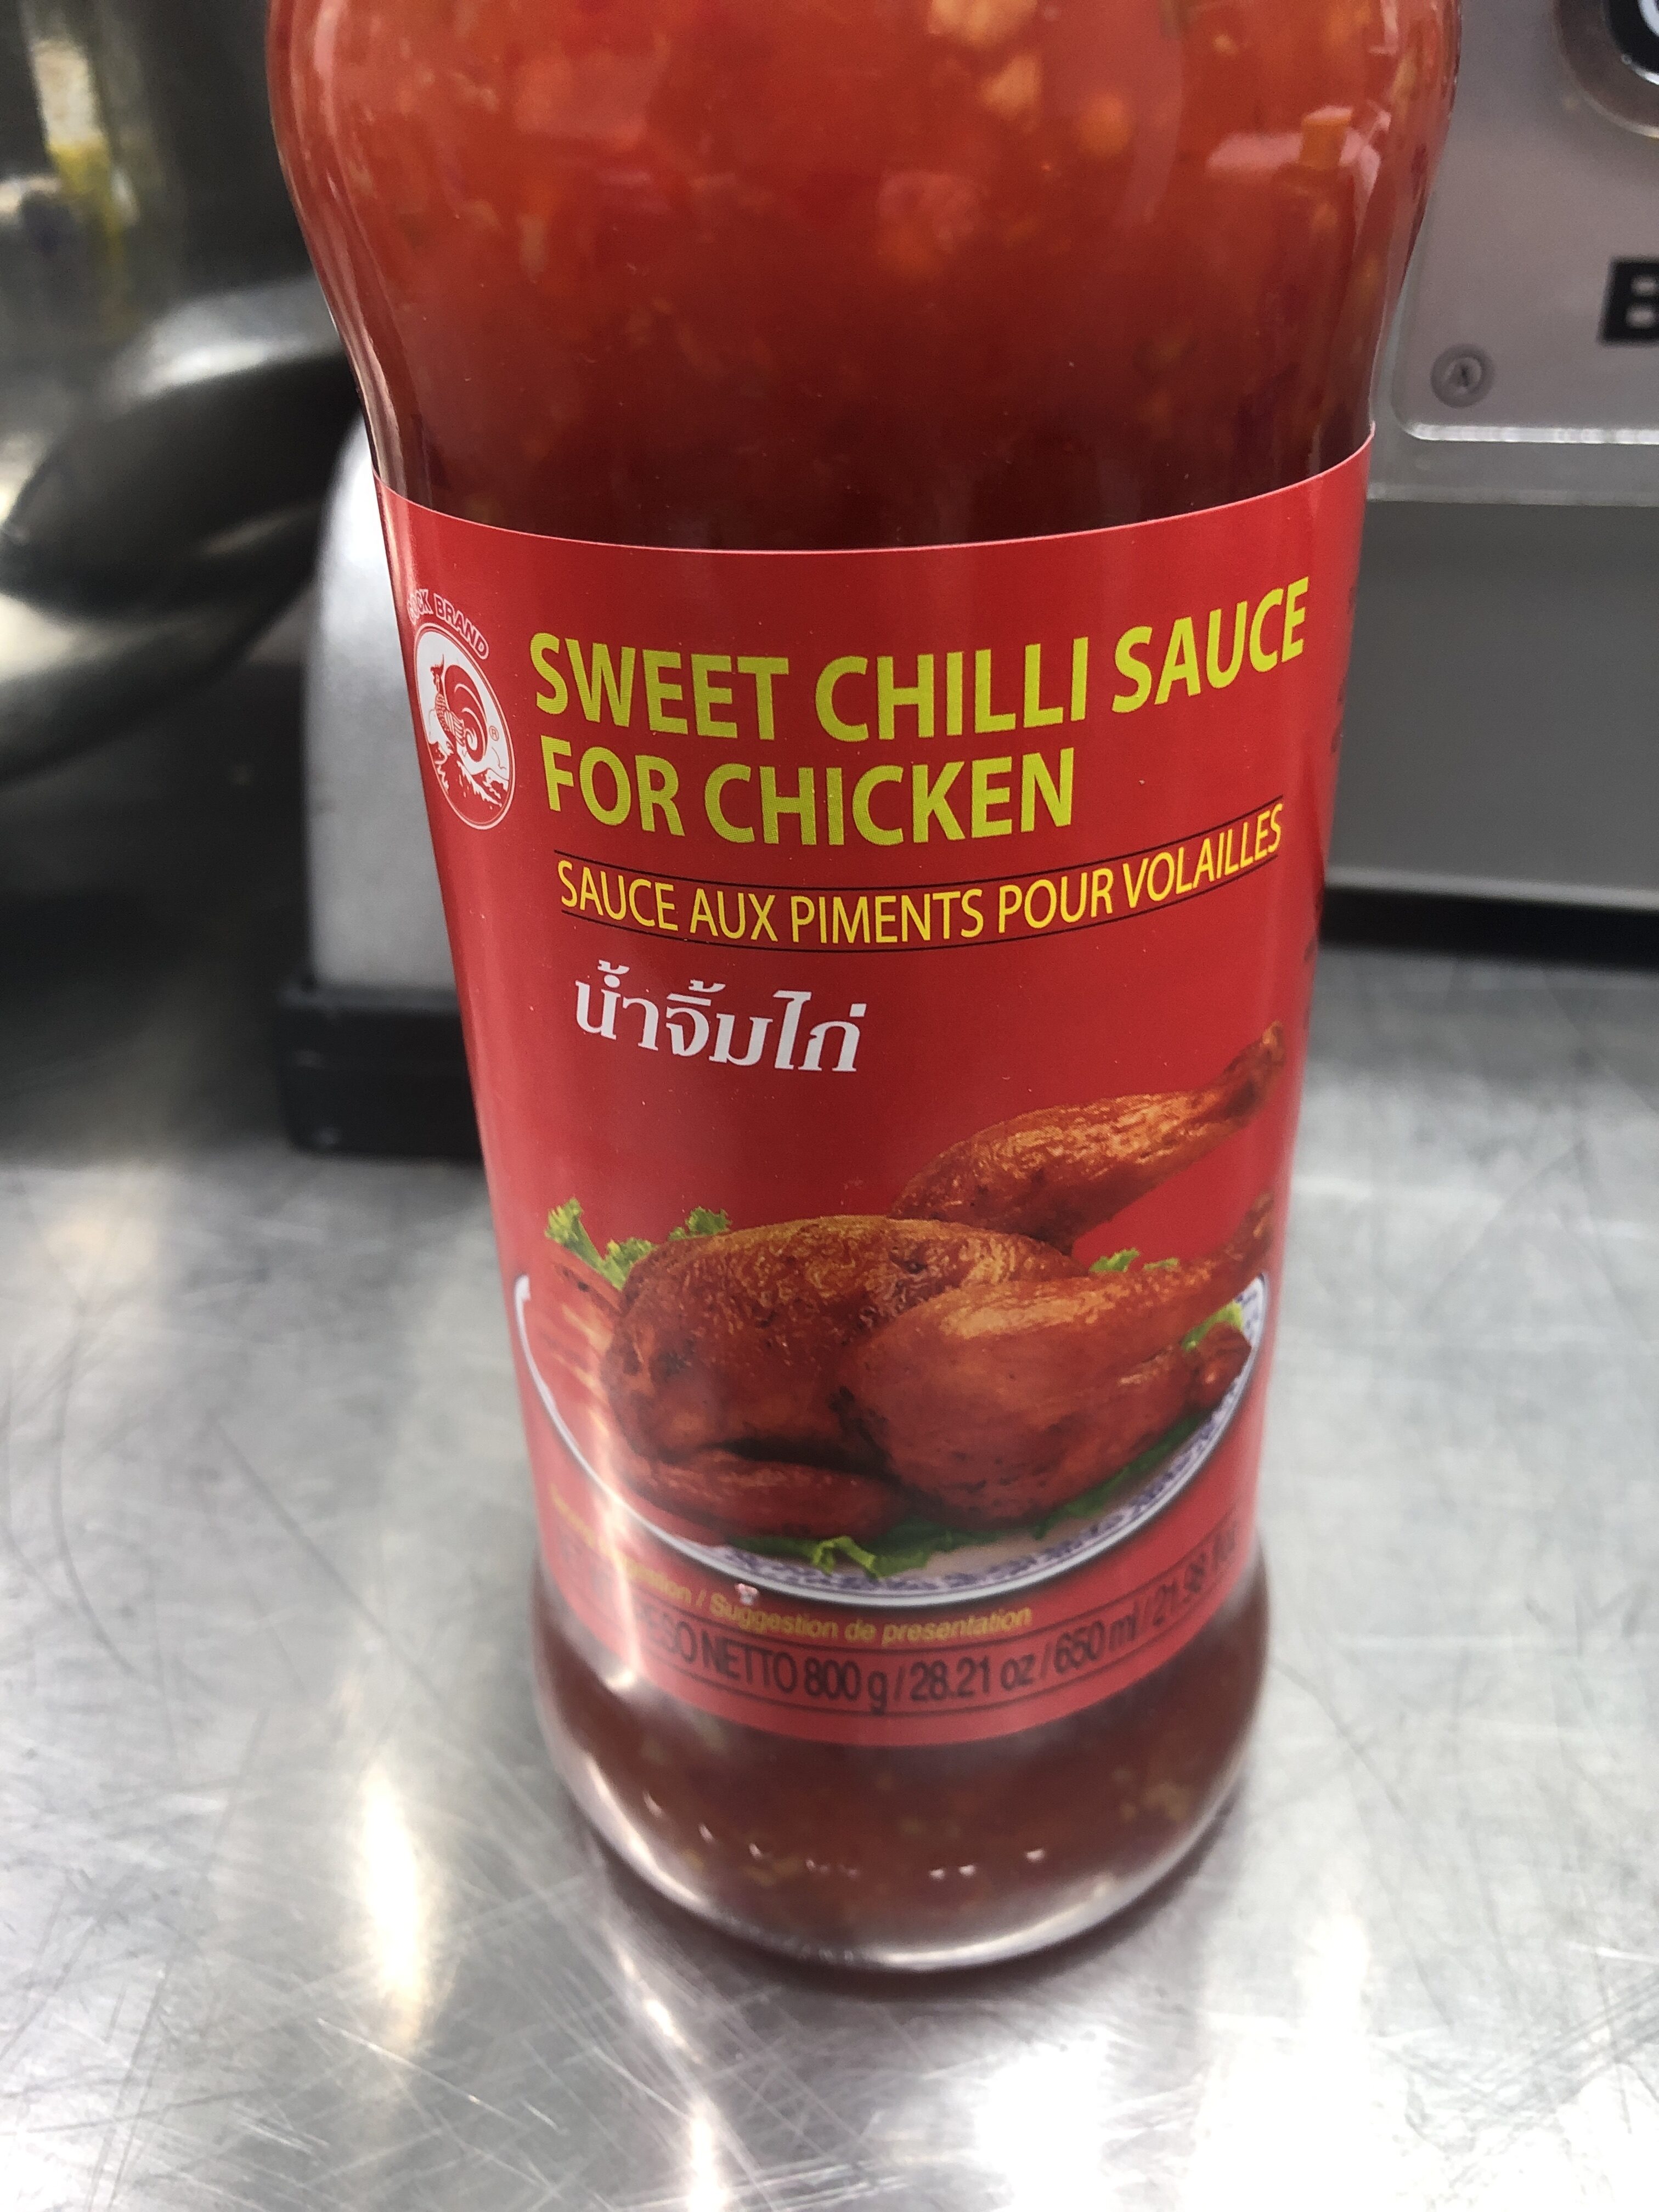 Sweet chili sauce for chicken - Instruction de recyclage et/ou informations d'emballage